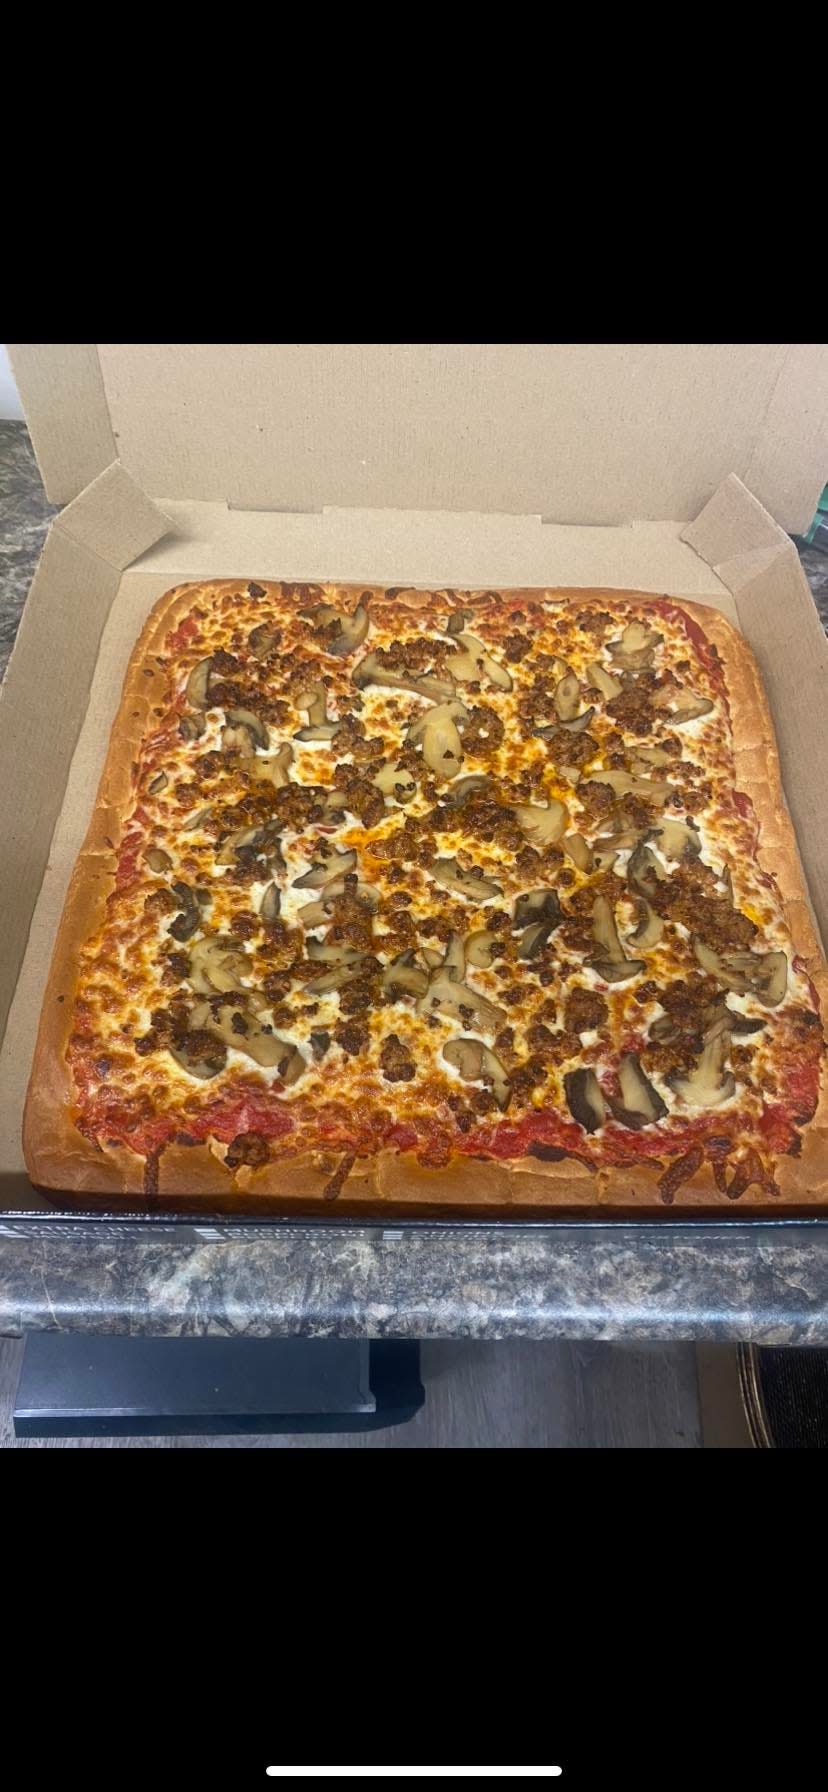 Al's Pizza is serving up many styles of pizza, breadsticks and more in New Brighton.